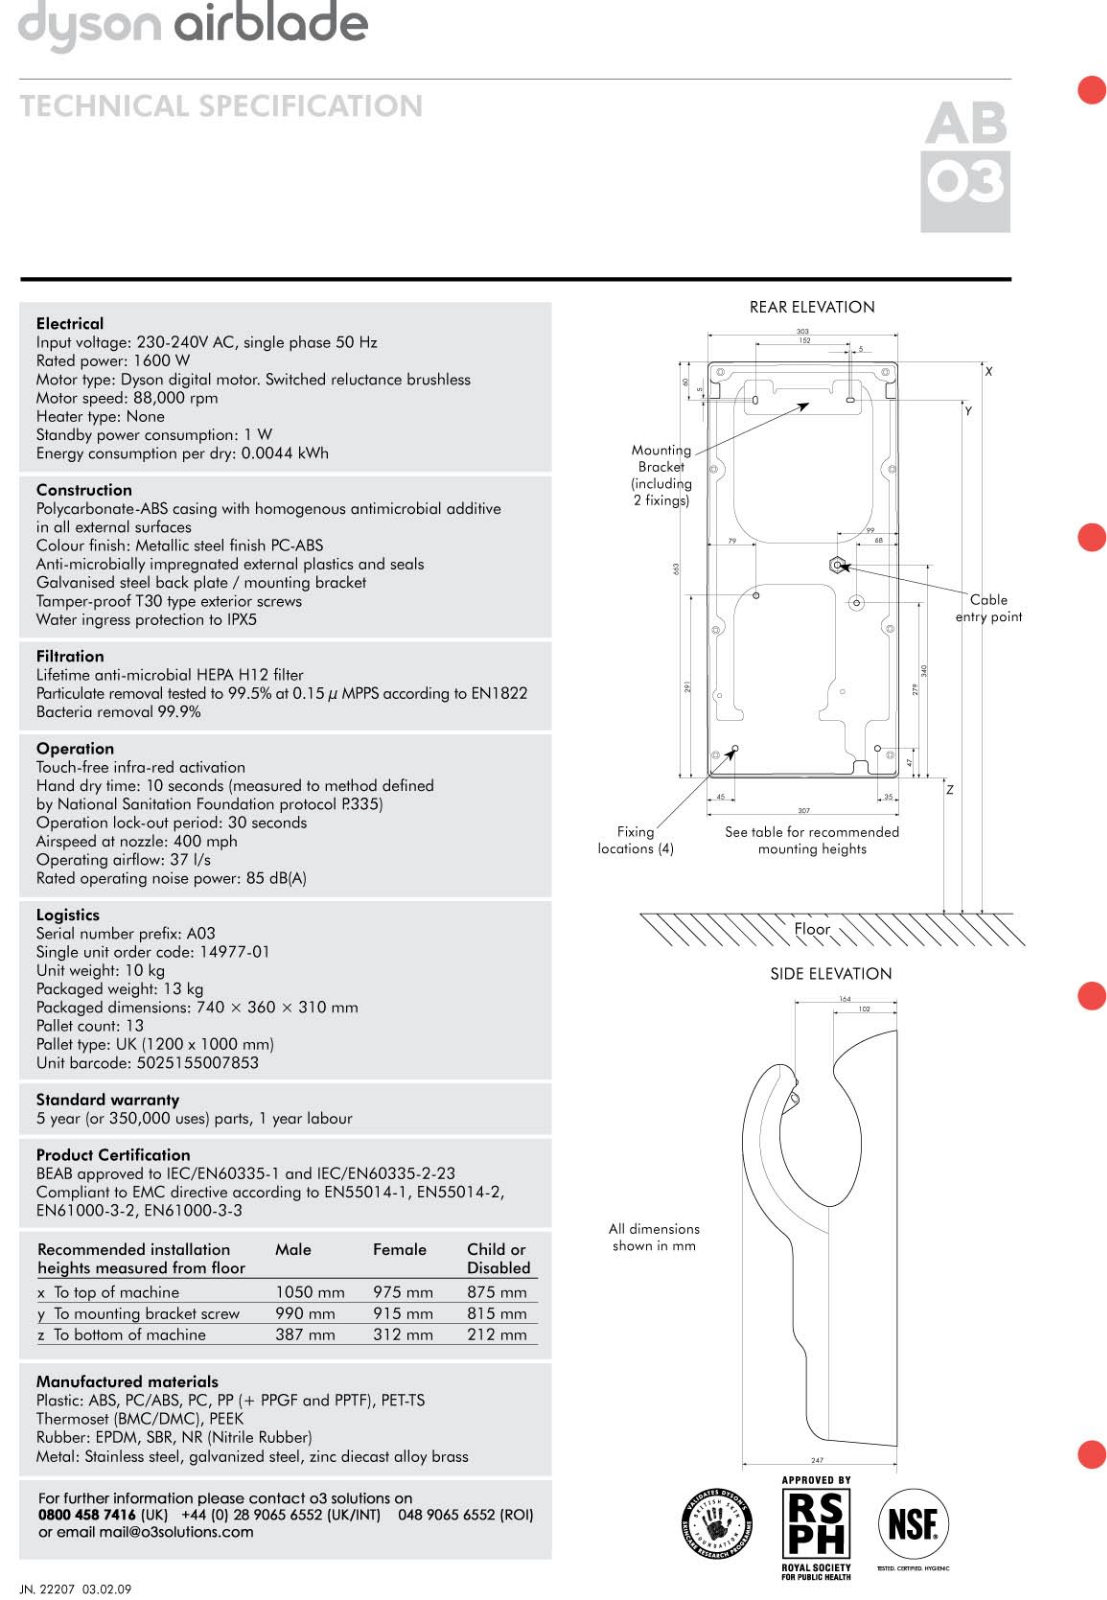 Dyson AIRBLADE AB03 TECHNICAL SPECIFICATION